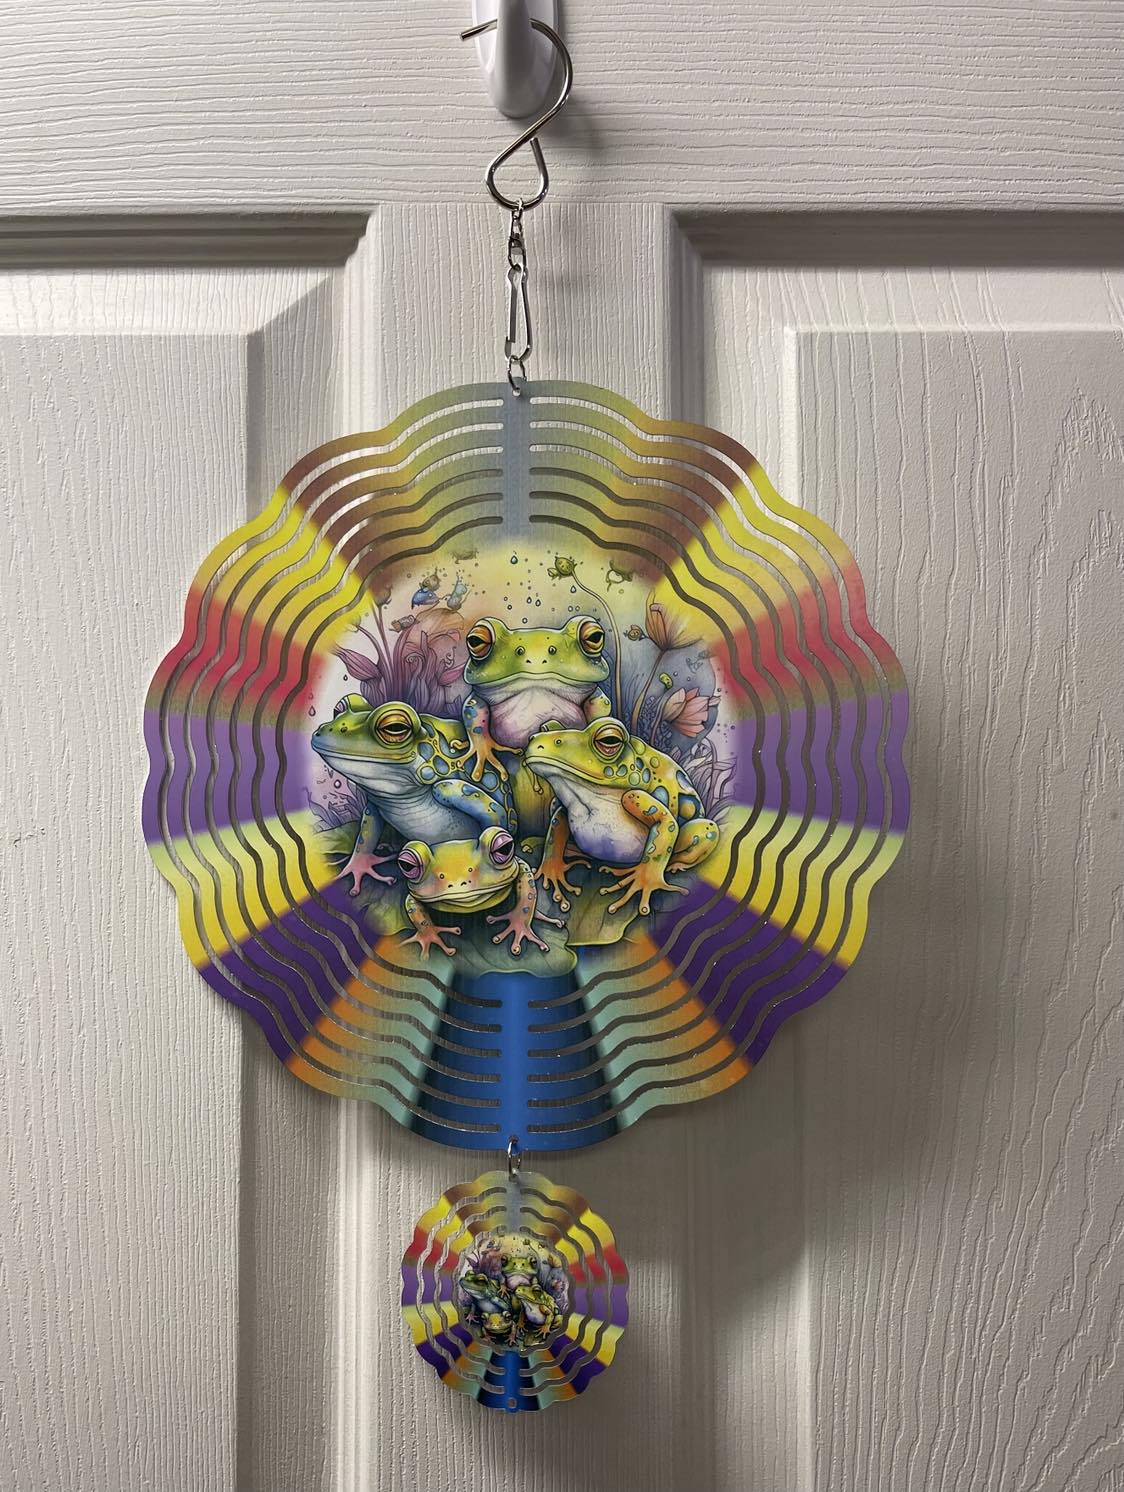 Blank/ Wind Spinner 8" and 10" Aluminum Round & Flower Db sided